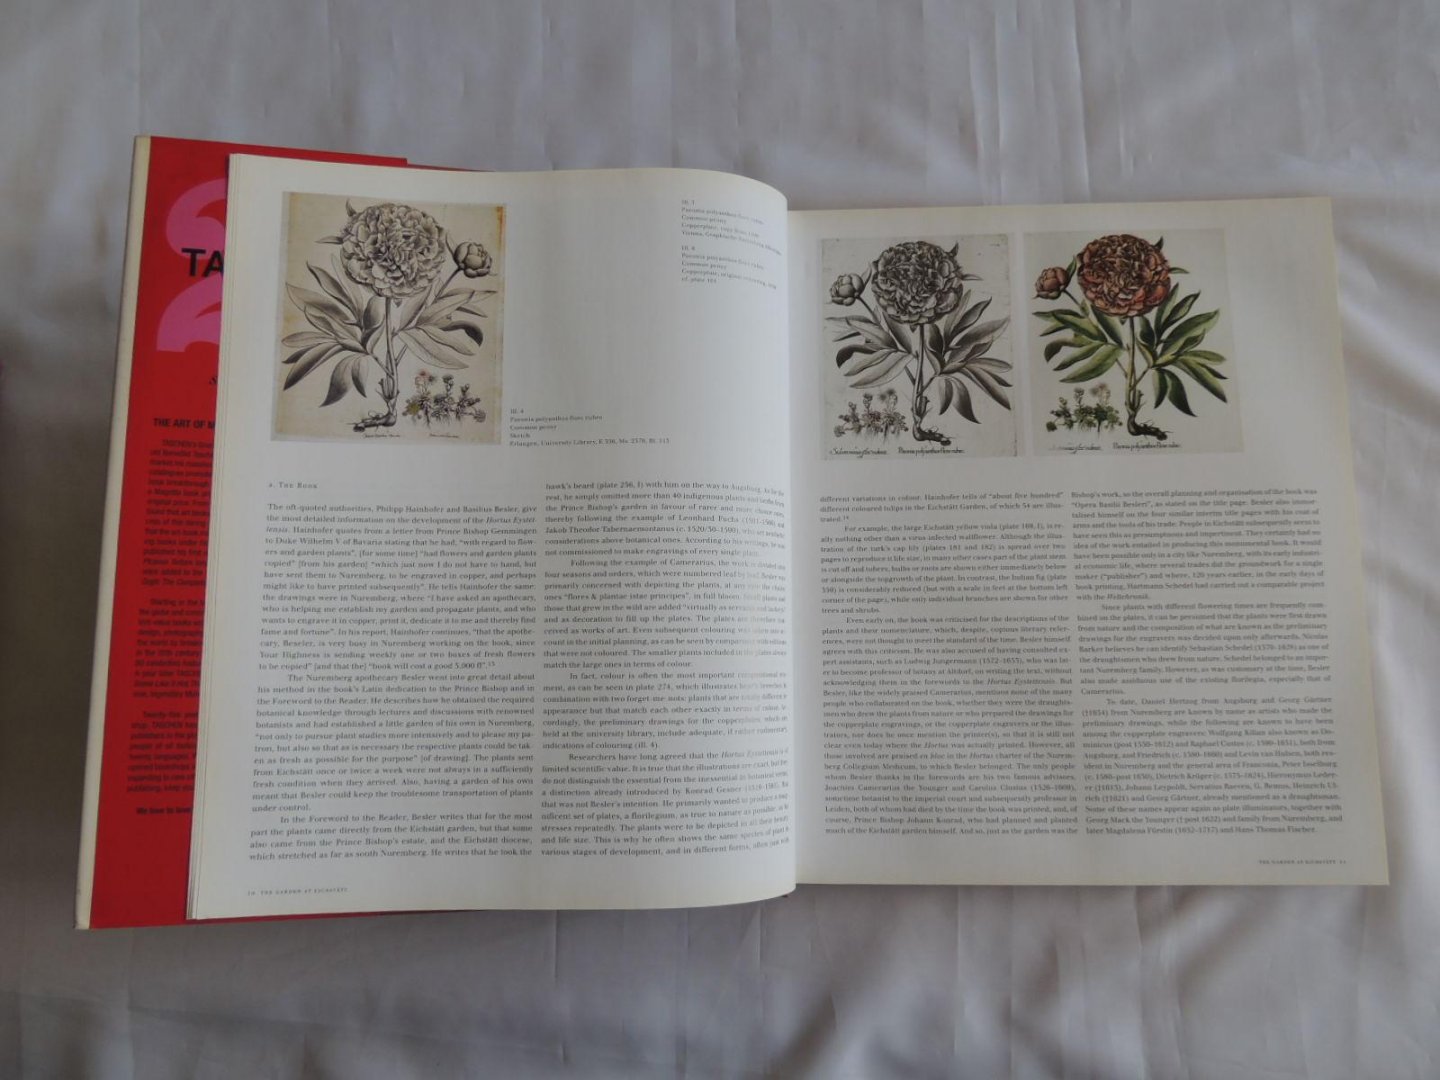 Besler, Basilius - The Book of Plants. The Complete Plates.